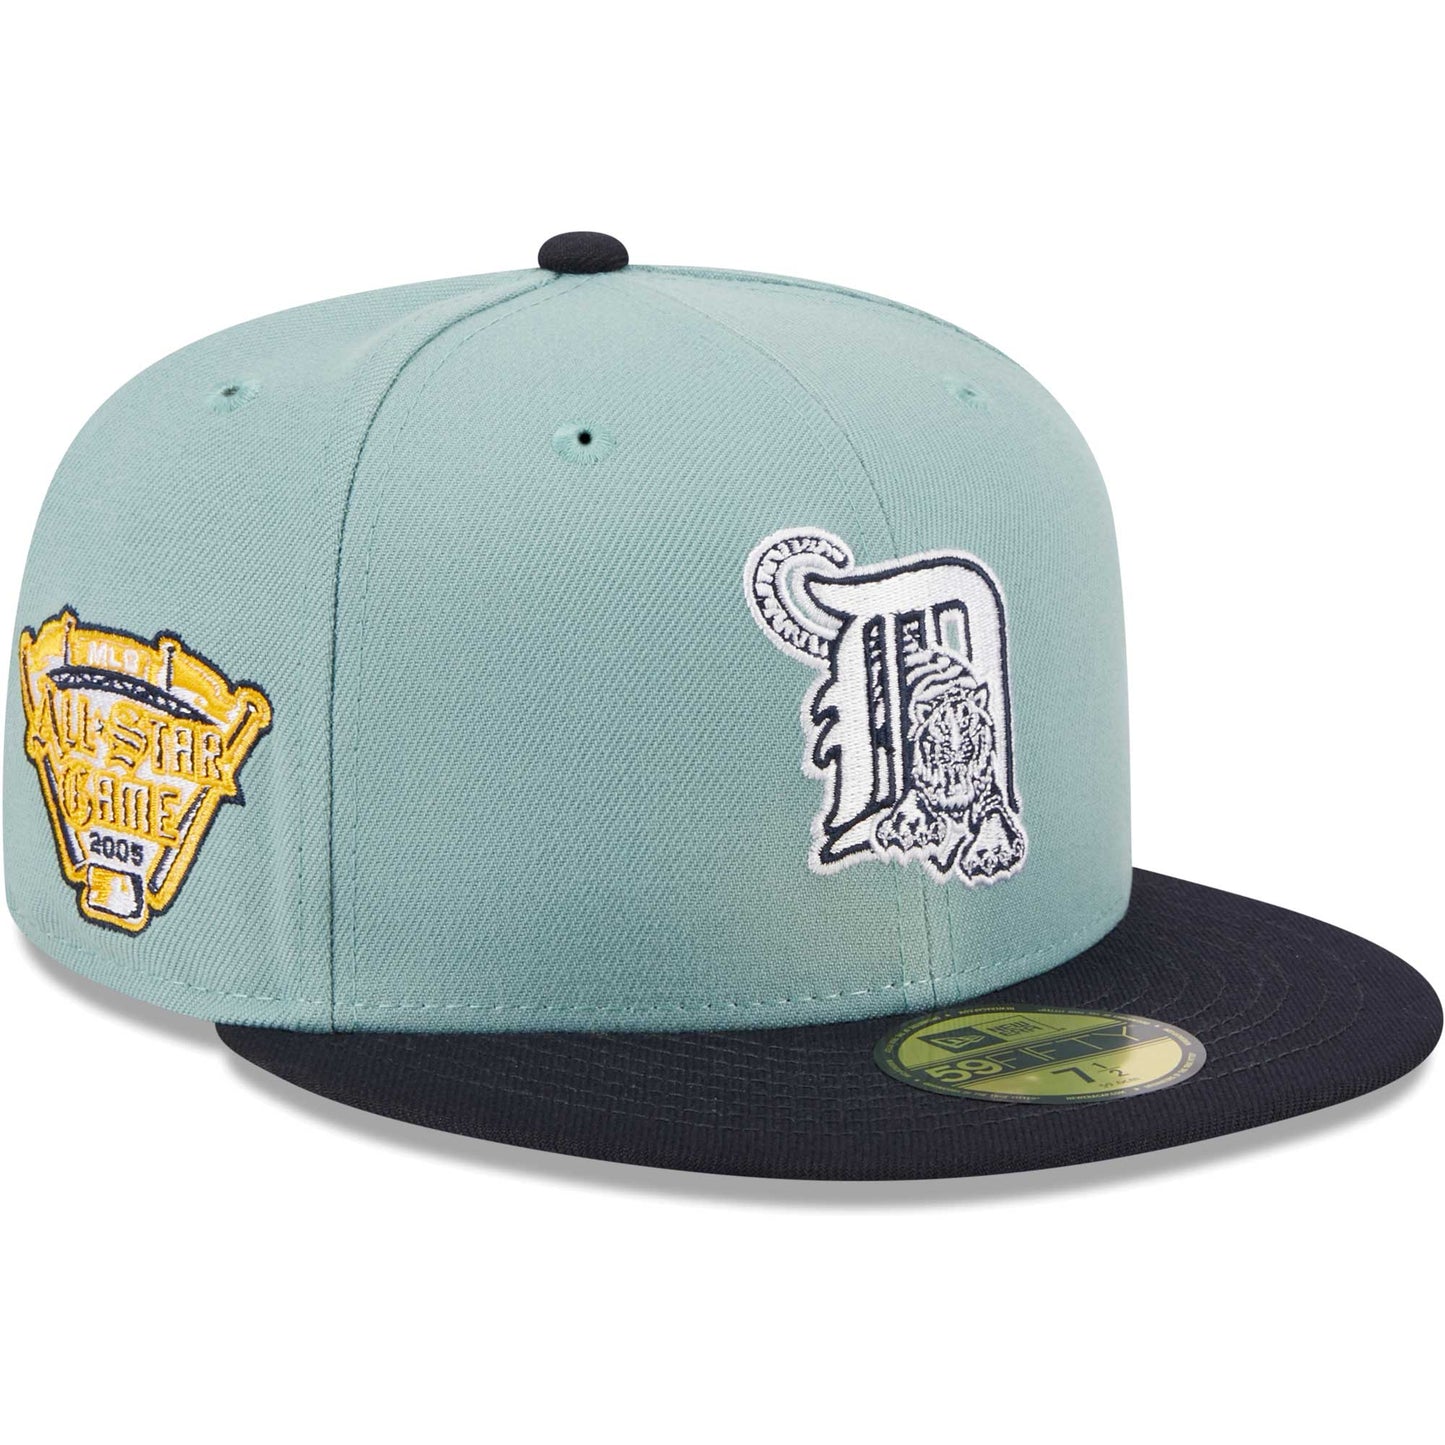 Detroit Tigers New Era Beach Kiss 59FIFTY Fitted Hat - Light Blue/Navy